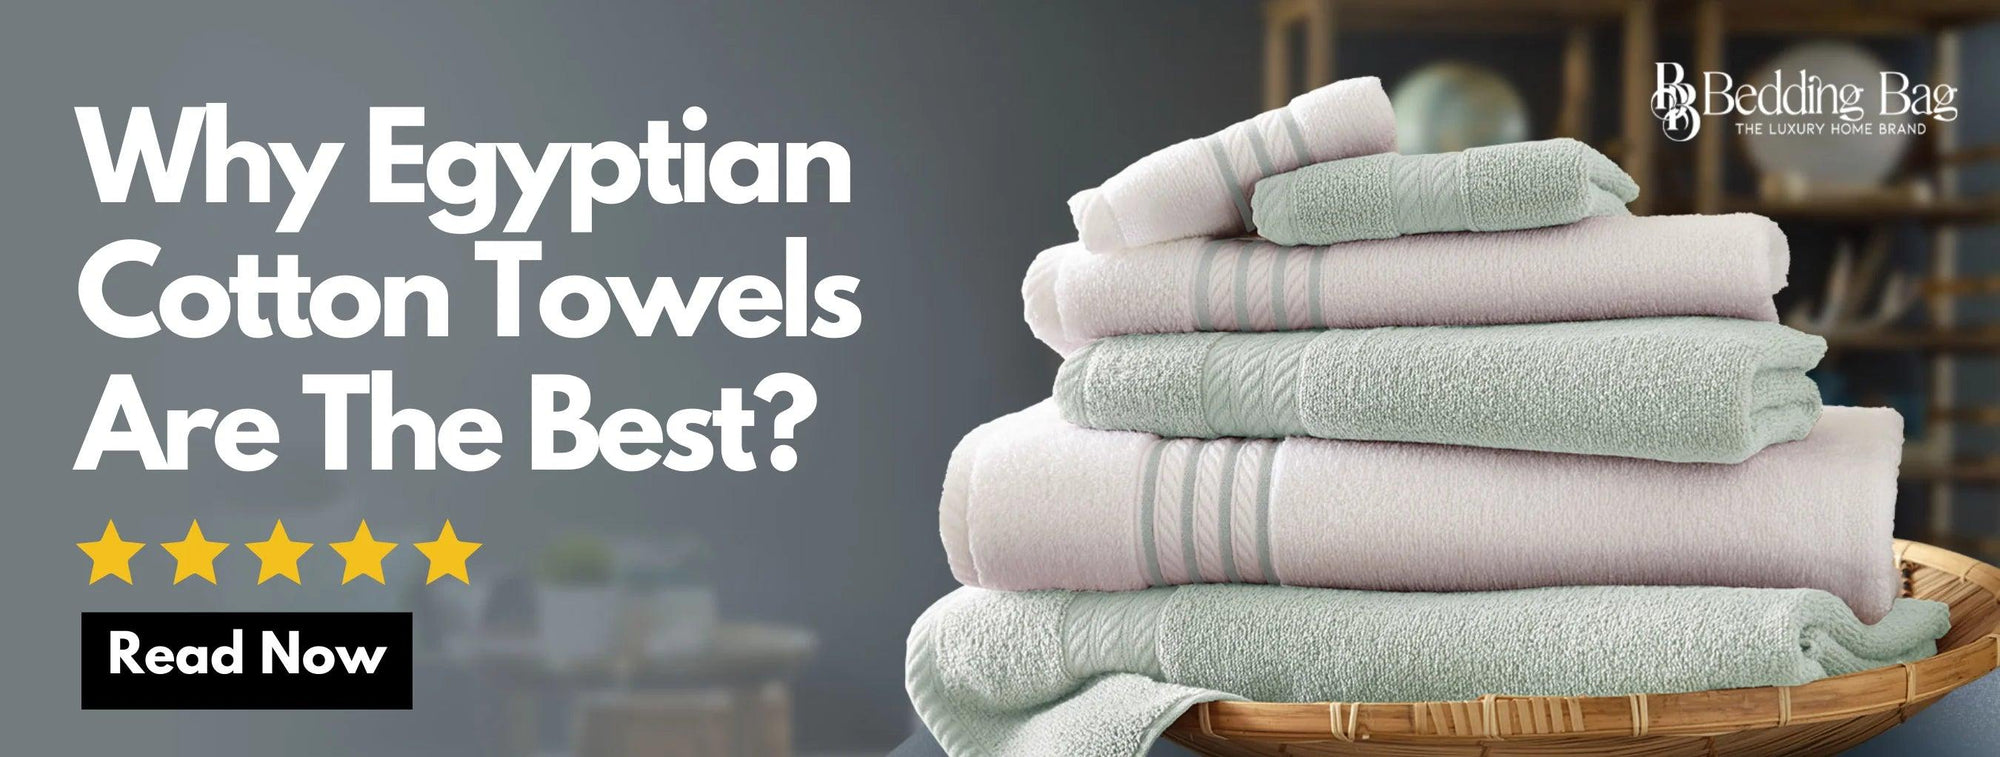 WHY EGYPTIAN COTTON TOWELS ARE THE BEST - beddingbag.com